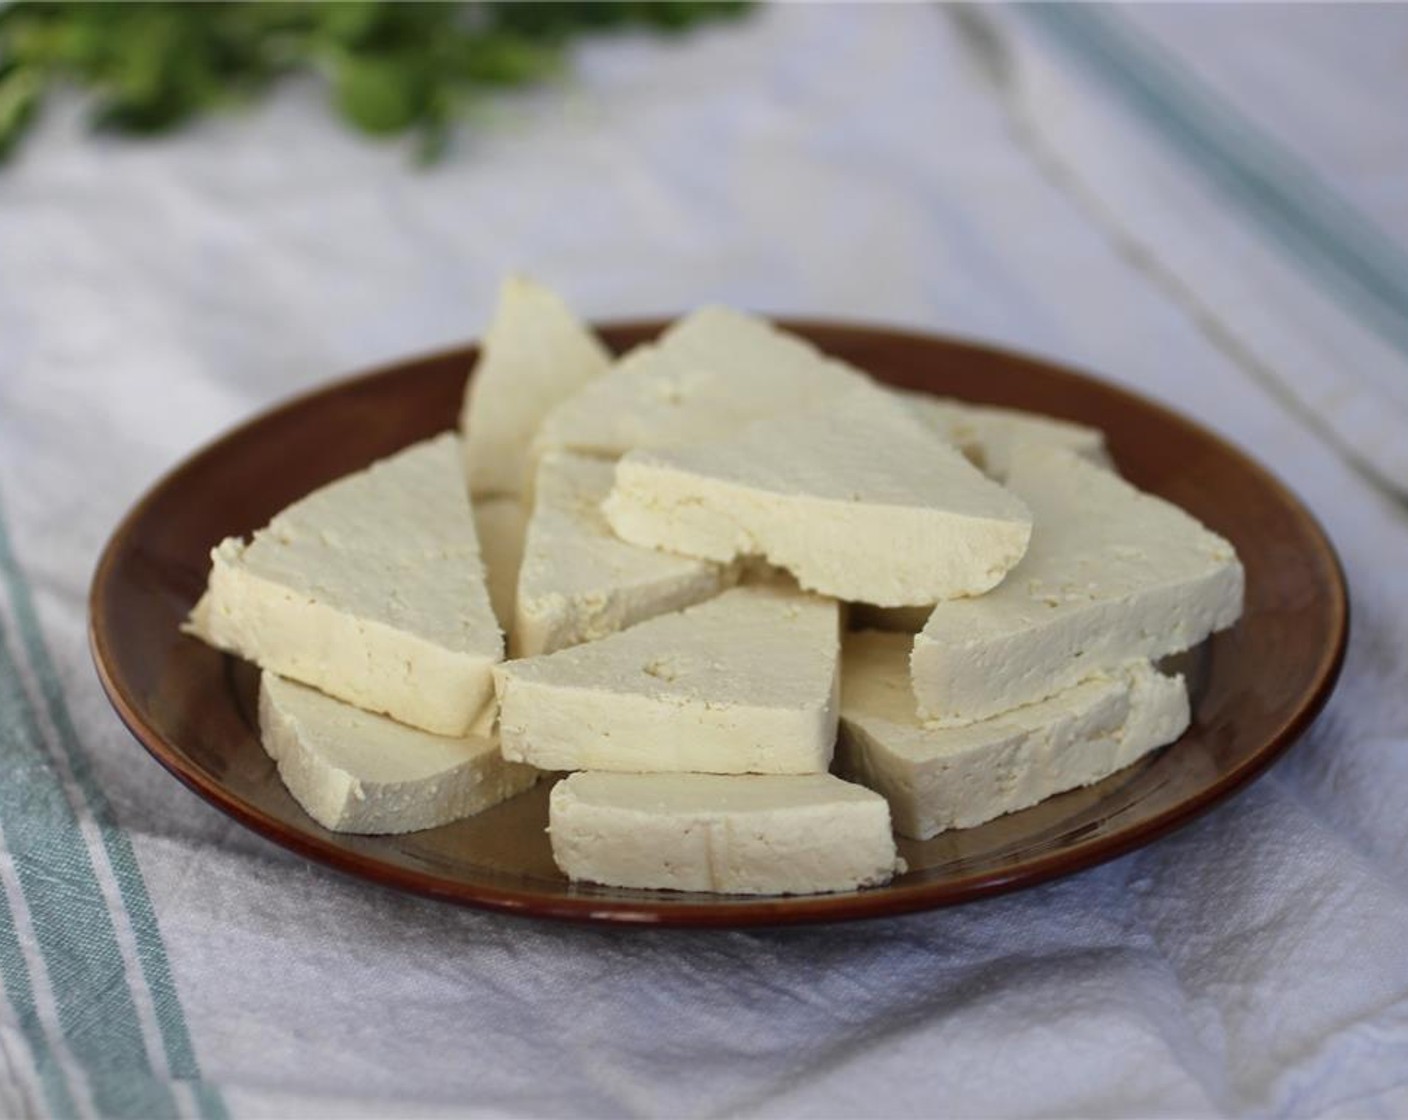 step 1 Drain the Tofu (1 block) between paper towel or a kitchen towel under a heavy pan or book for at least 30 minutes. Cut tofu into squares or triangles.